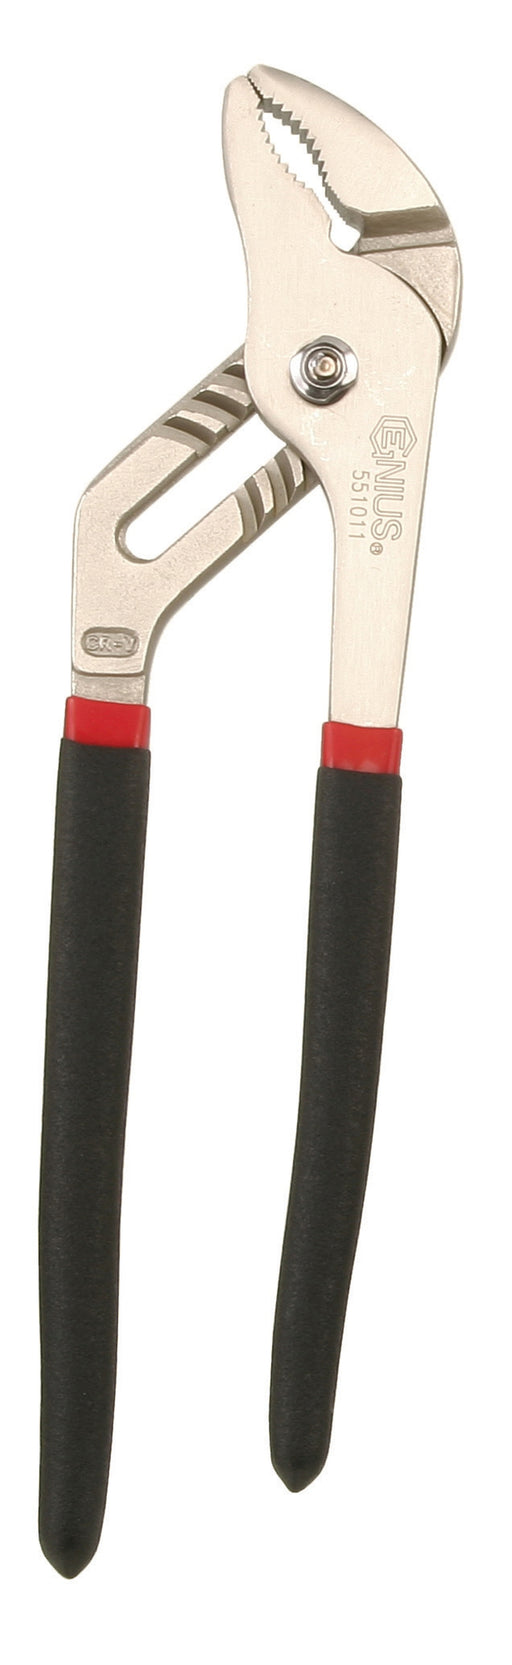 Genius Tools Tongue and Groove Pliers, 150mmL